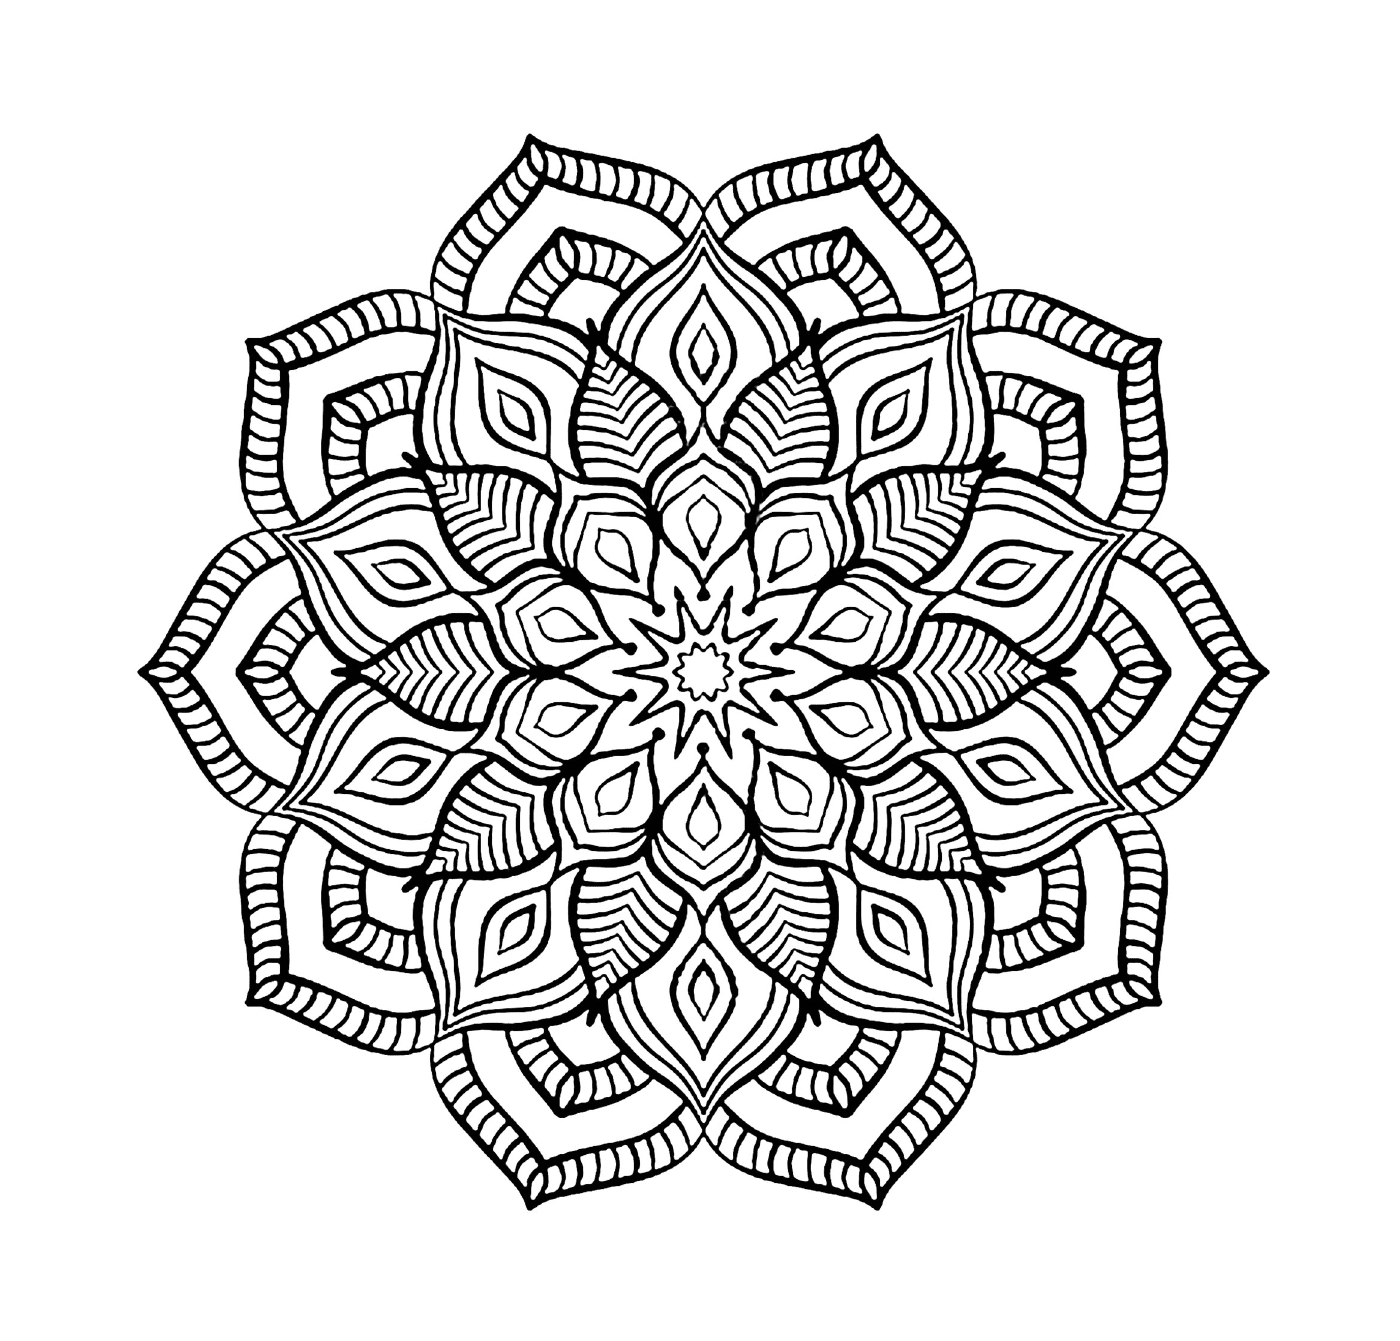  A floral mandala for adults, to relax 